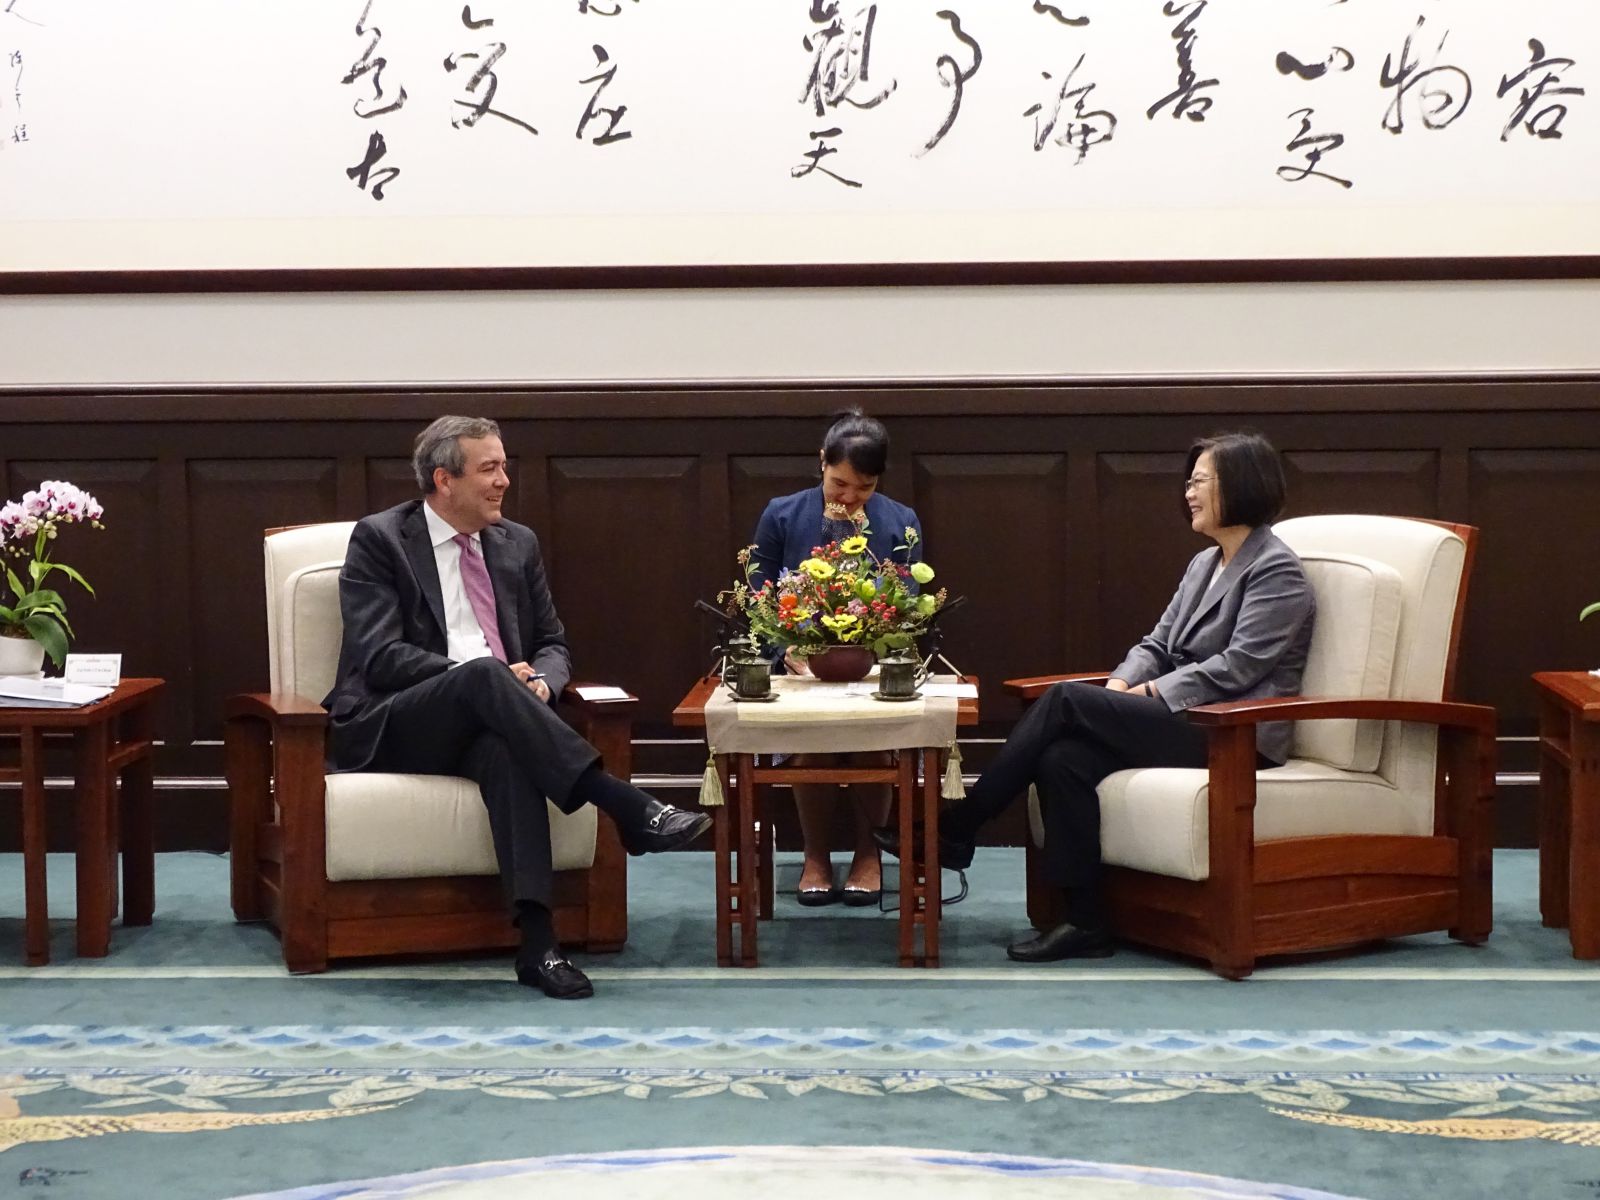 photo, OPIC Acting President and CEO David Bohigian meets with Taiwan President Tsai Ing-wen, OPIC , Overseas Private Investment Corporation, USIDFC, development finance corporation, dfi, investing overseas, emerging markets, world development, political risk insurance, public diplomacy, foreign policy, OPIC 2X, Indo Pacific